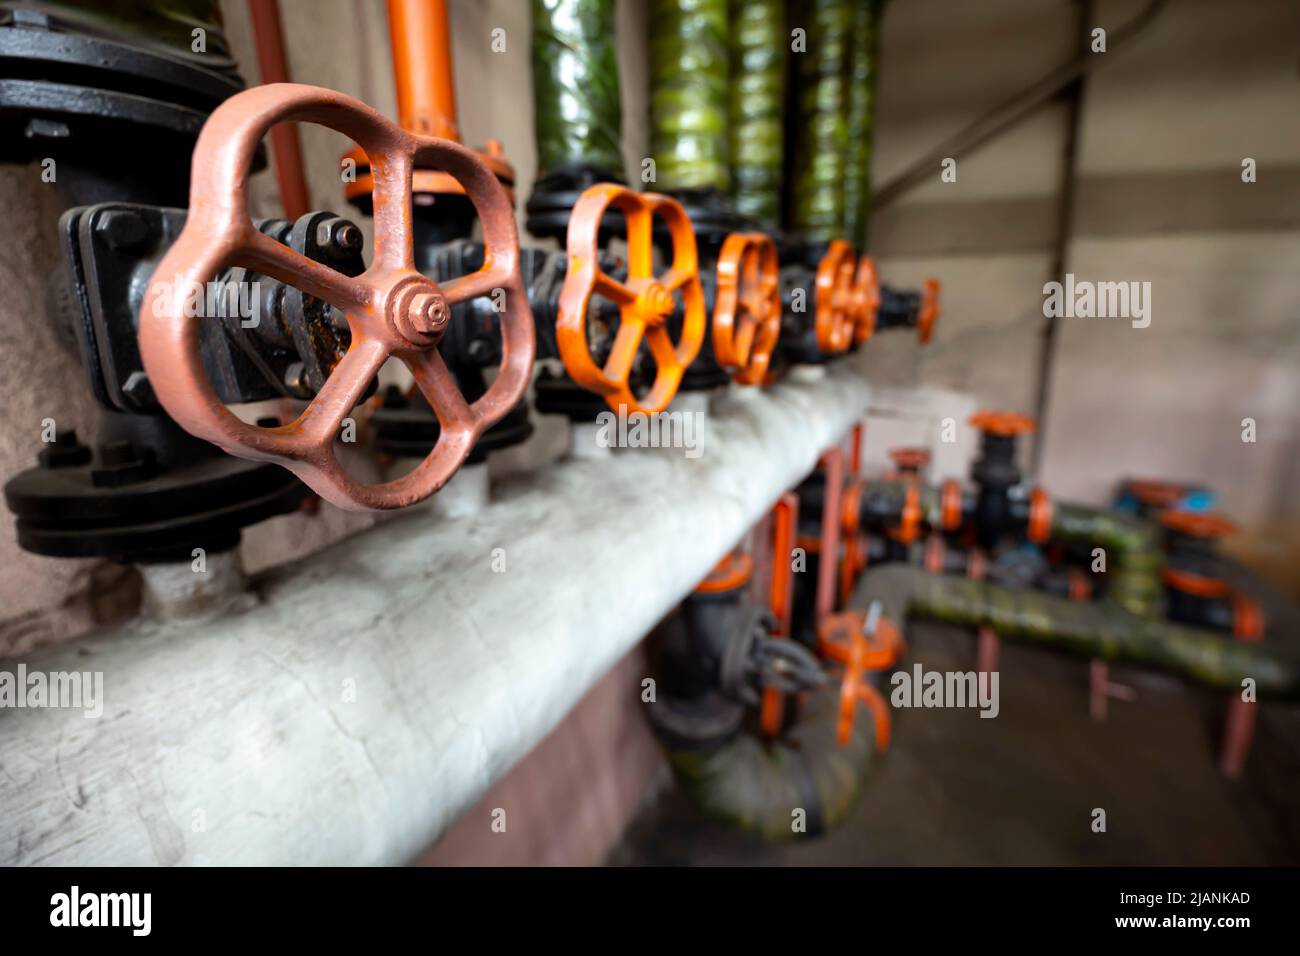 Valves and pipes which are part of a cooling system. Stock Photo